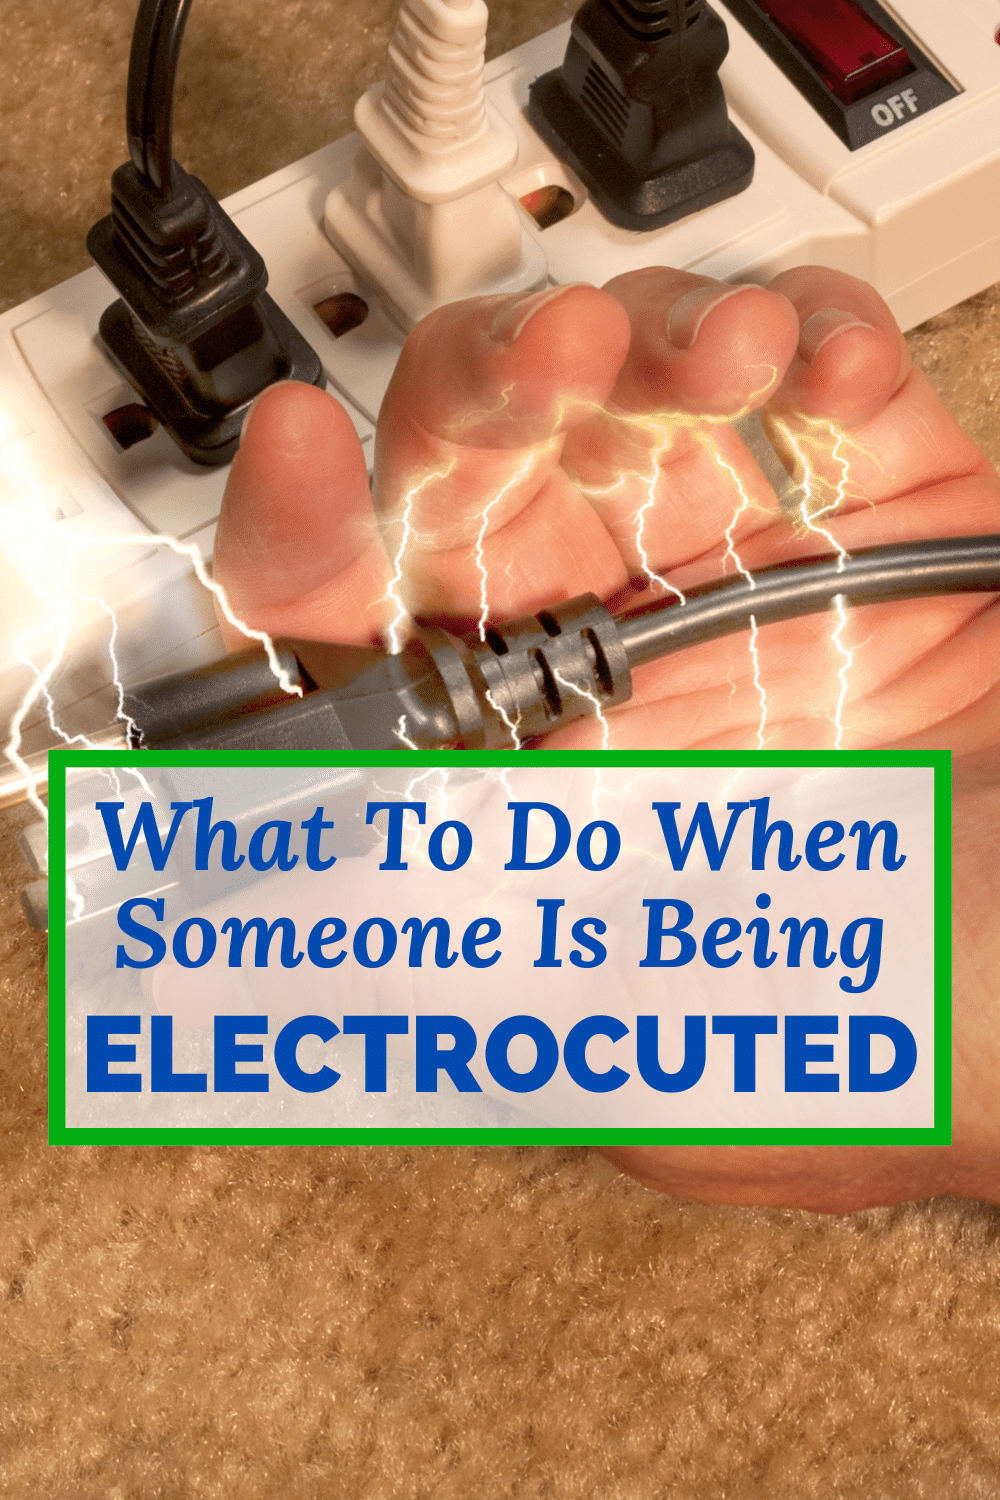 What To Do When Someone Is Being Electrocuted